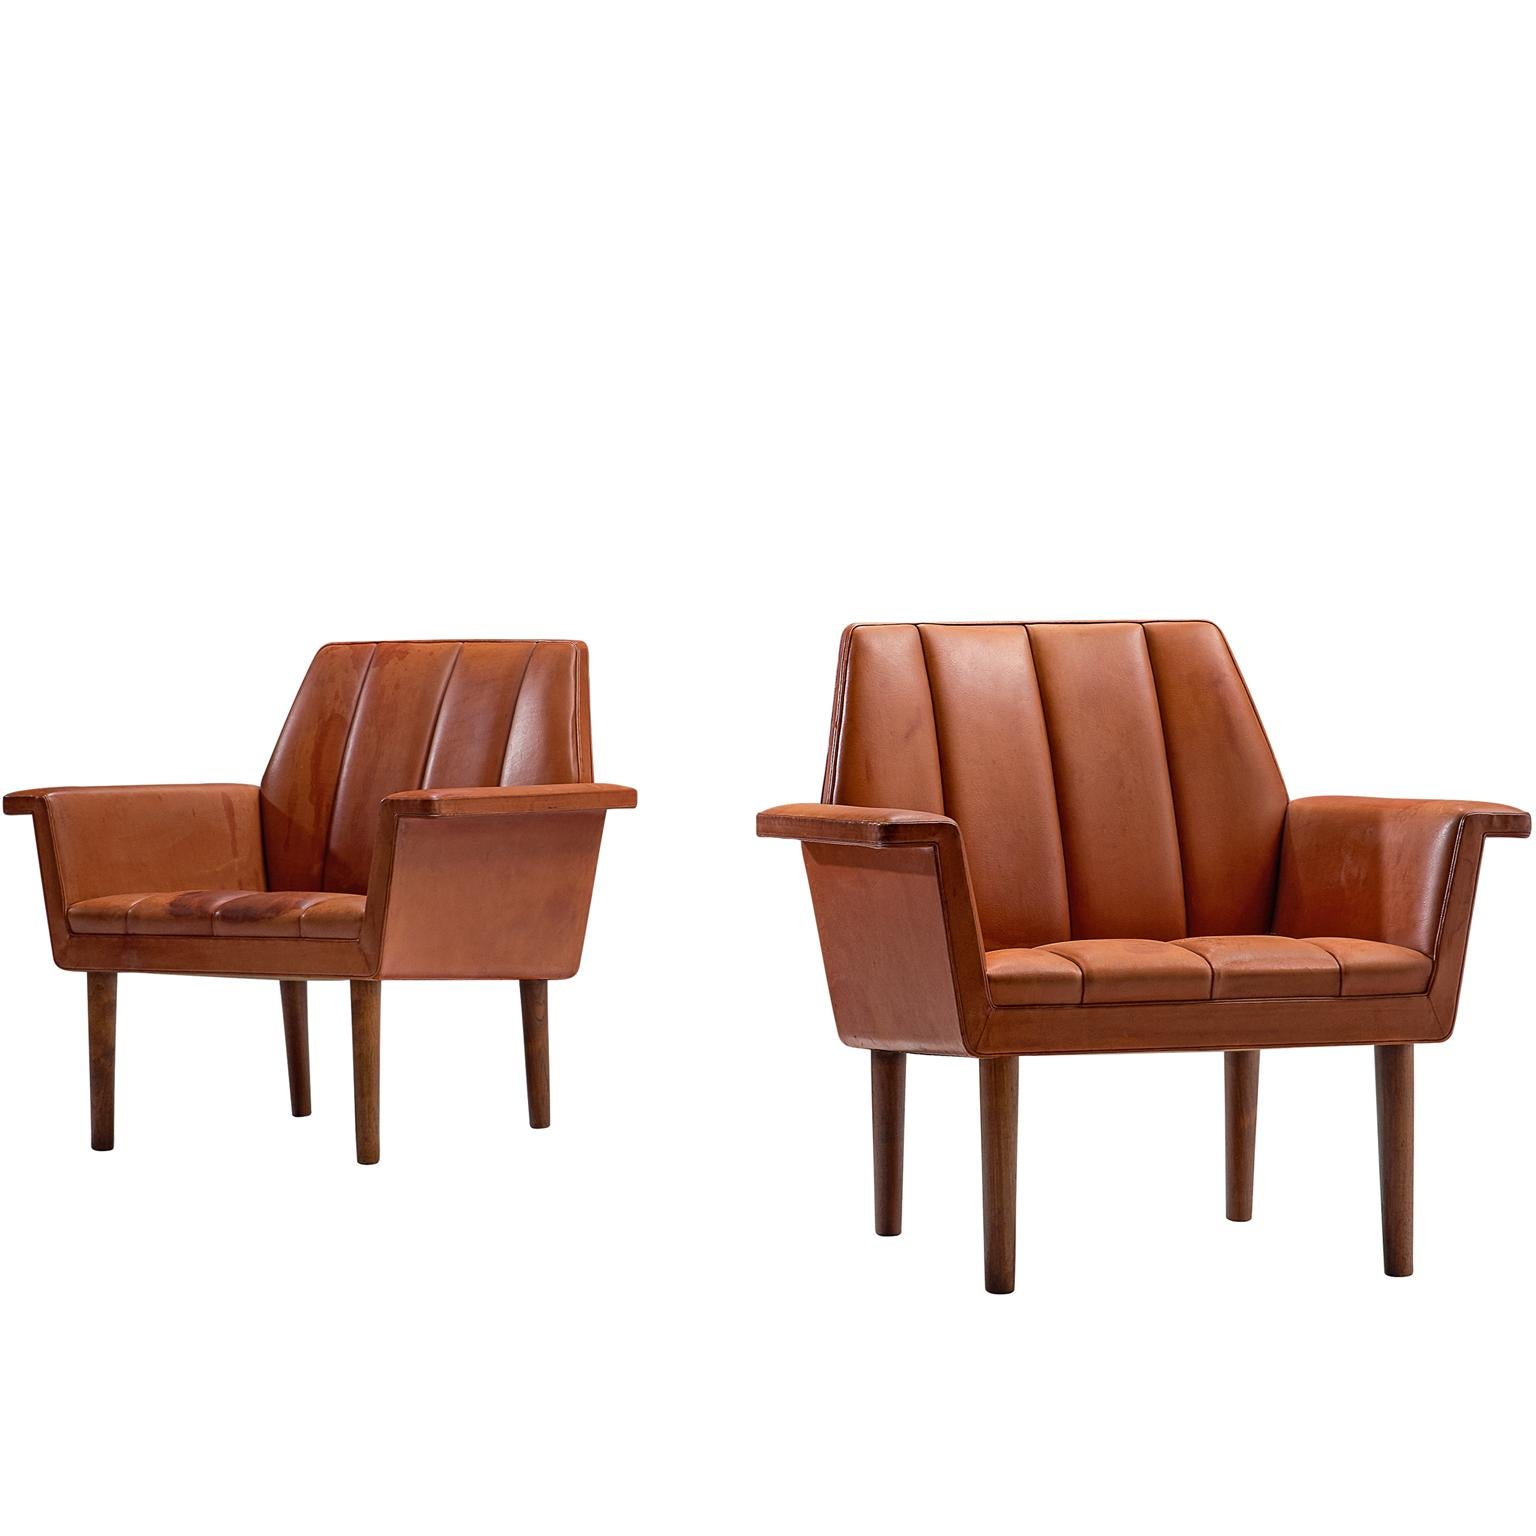 Helge Vestergaard-Jensen Pair of Red Leather Lounge Chairs